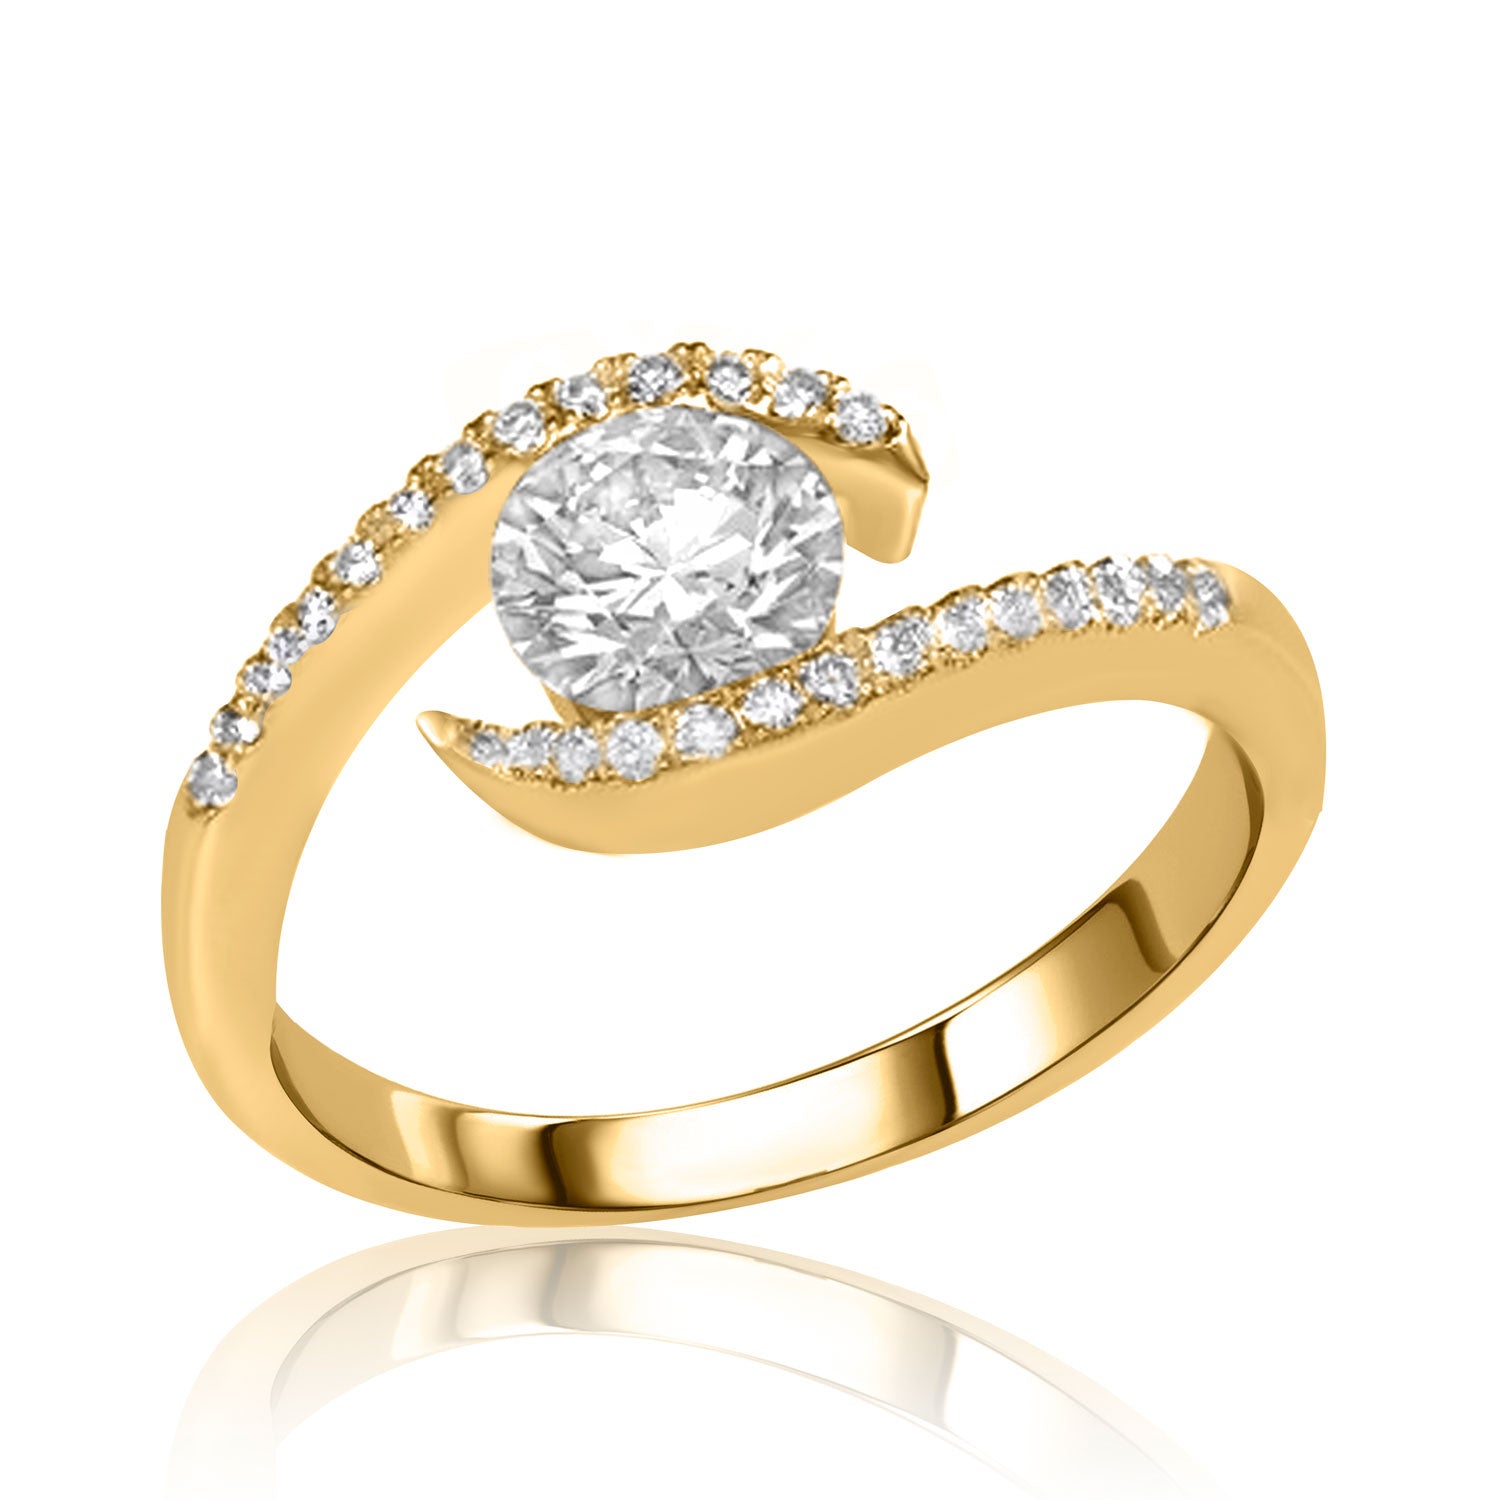 Swan Lake - Solitaire Ring- Lab Created Diamonds